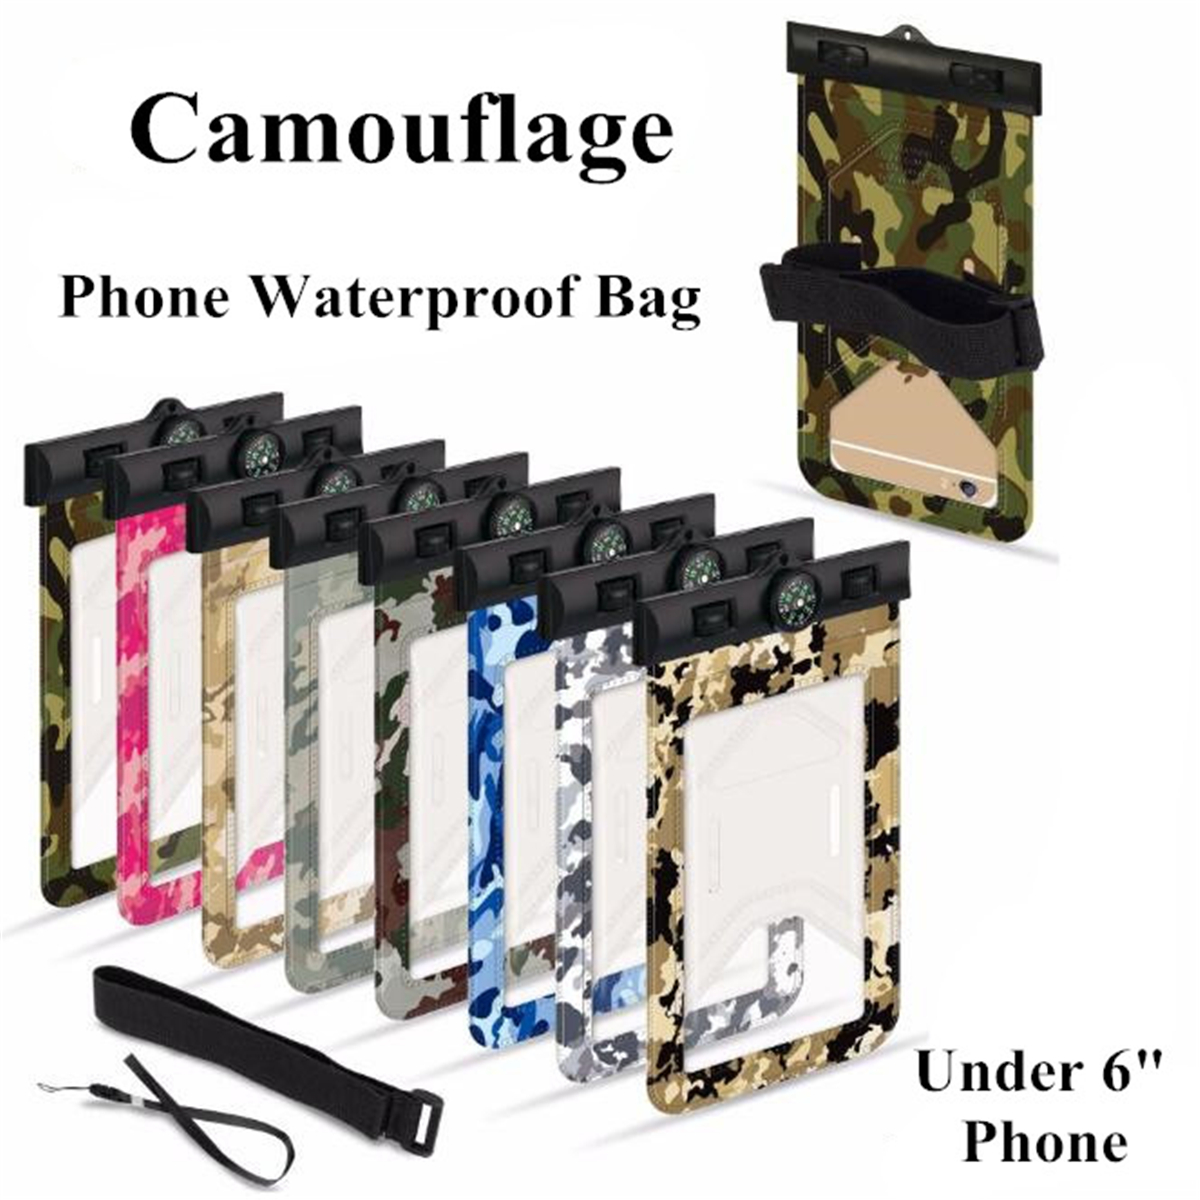 Universal-Sport-Screen-Touch-Waterproof-Lanyard-Bag-Arm-Band-for-Xiaomi-Mobile-Phone-Under-6-inch-No-1443363-1